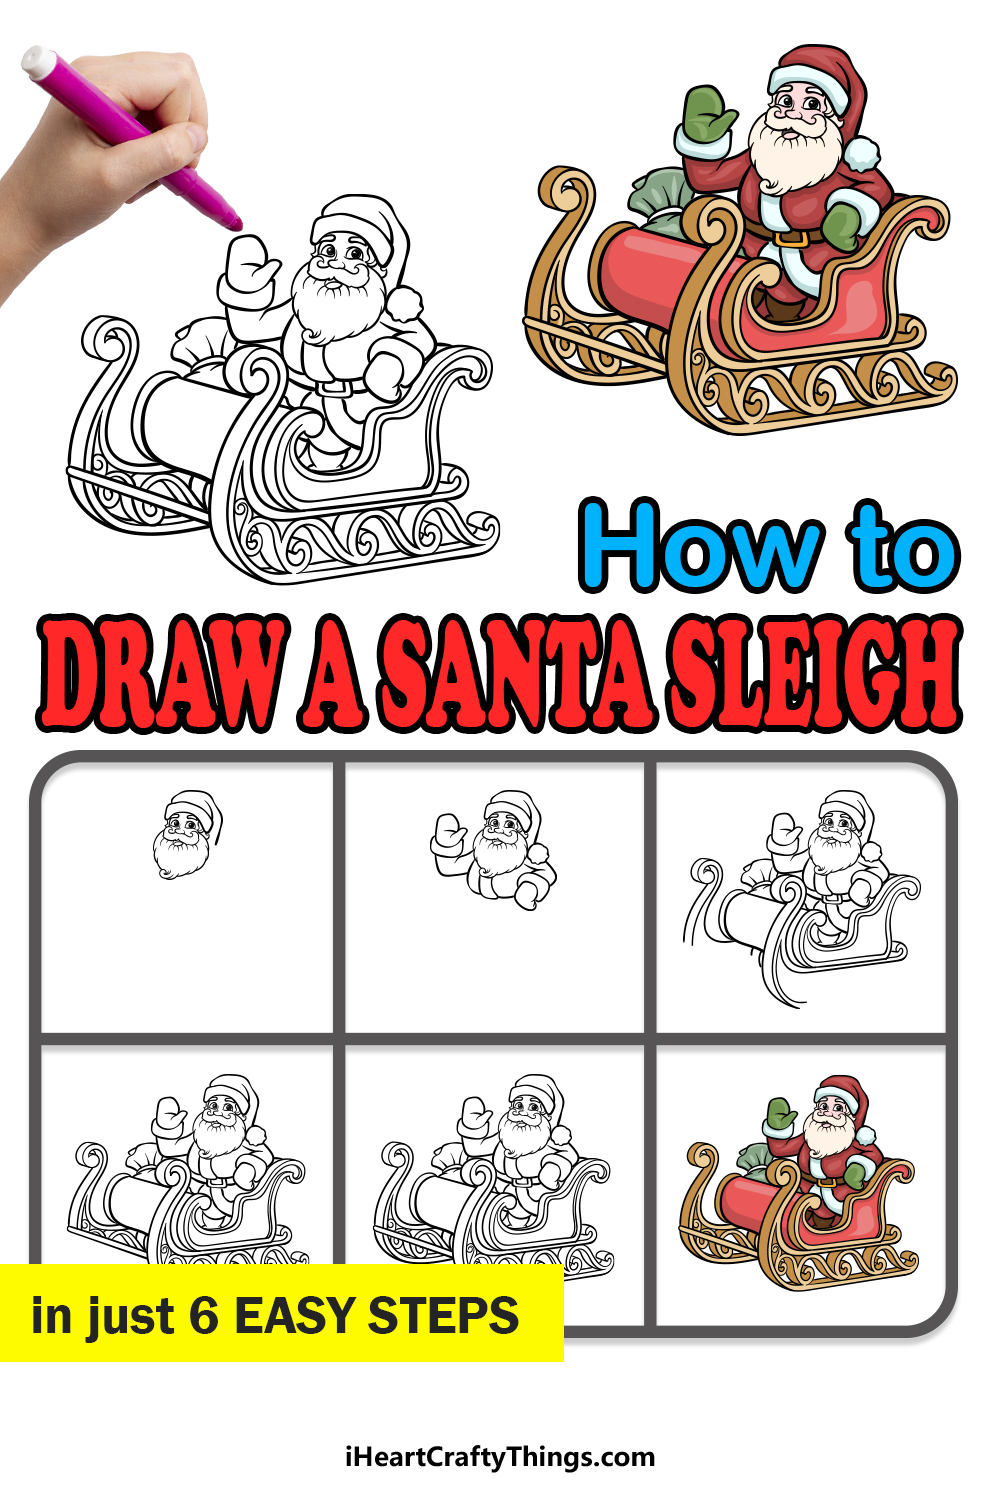 how to draw a Santa Sleigh in 6 easy steps